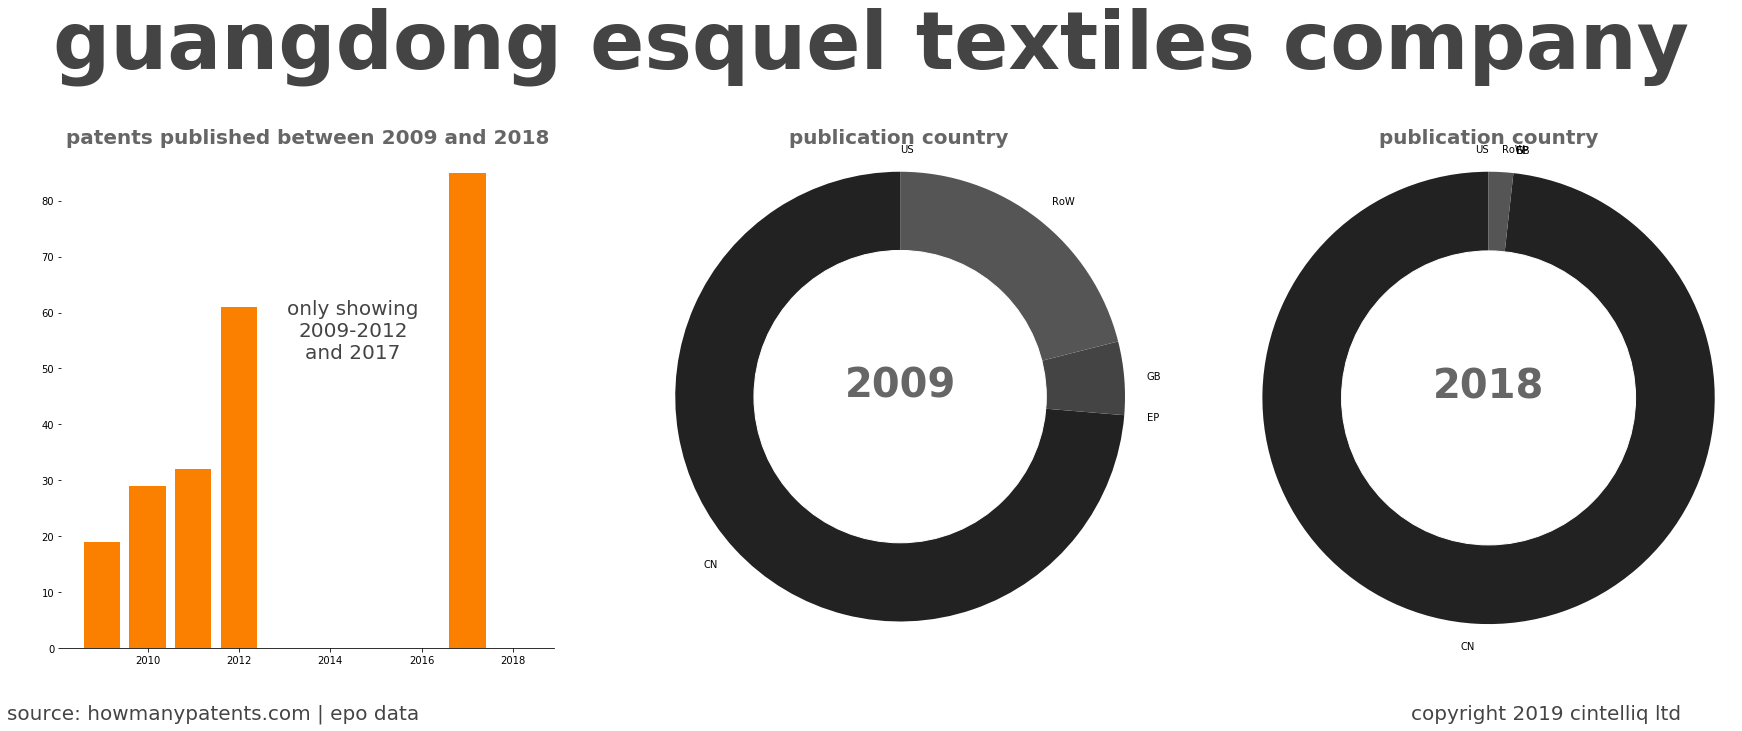 summary of patents for Guangdong Esquel Textiles Company